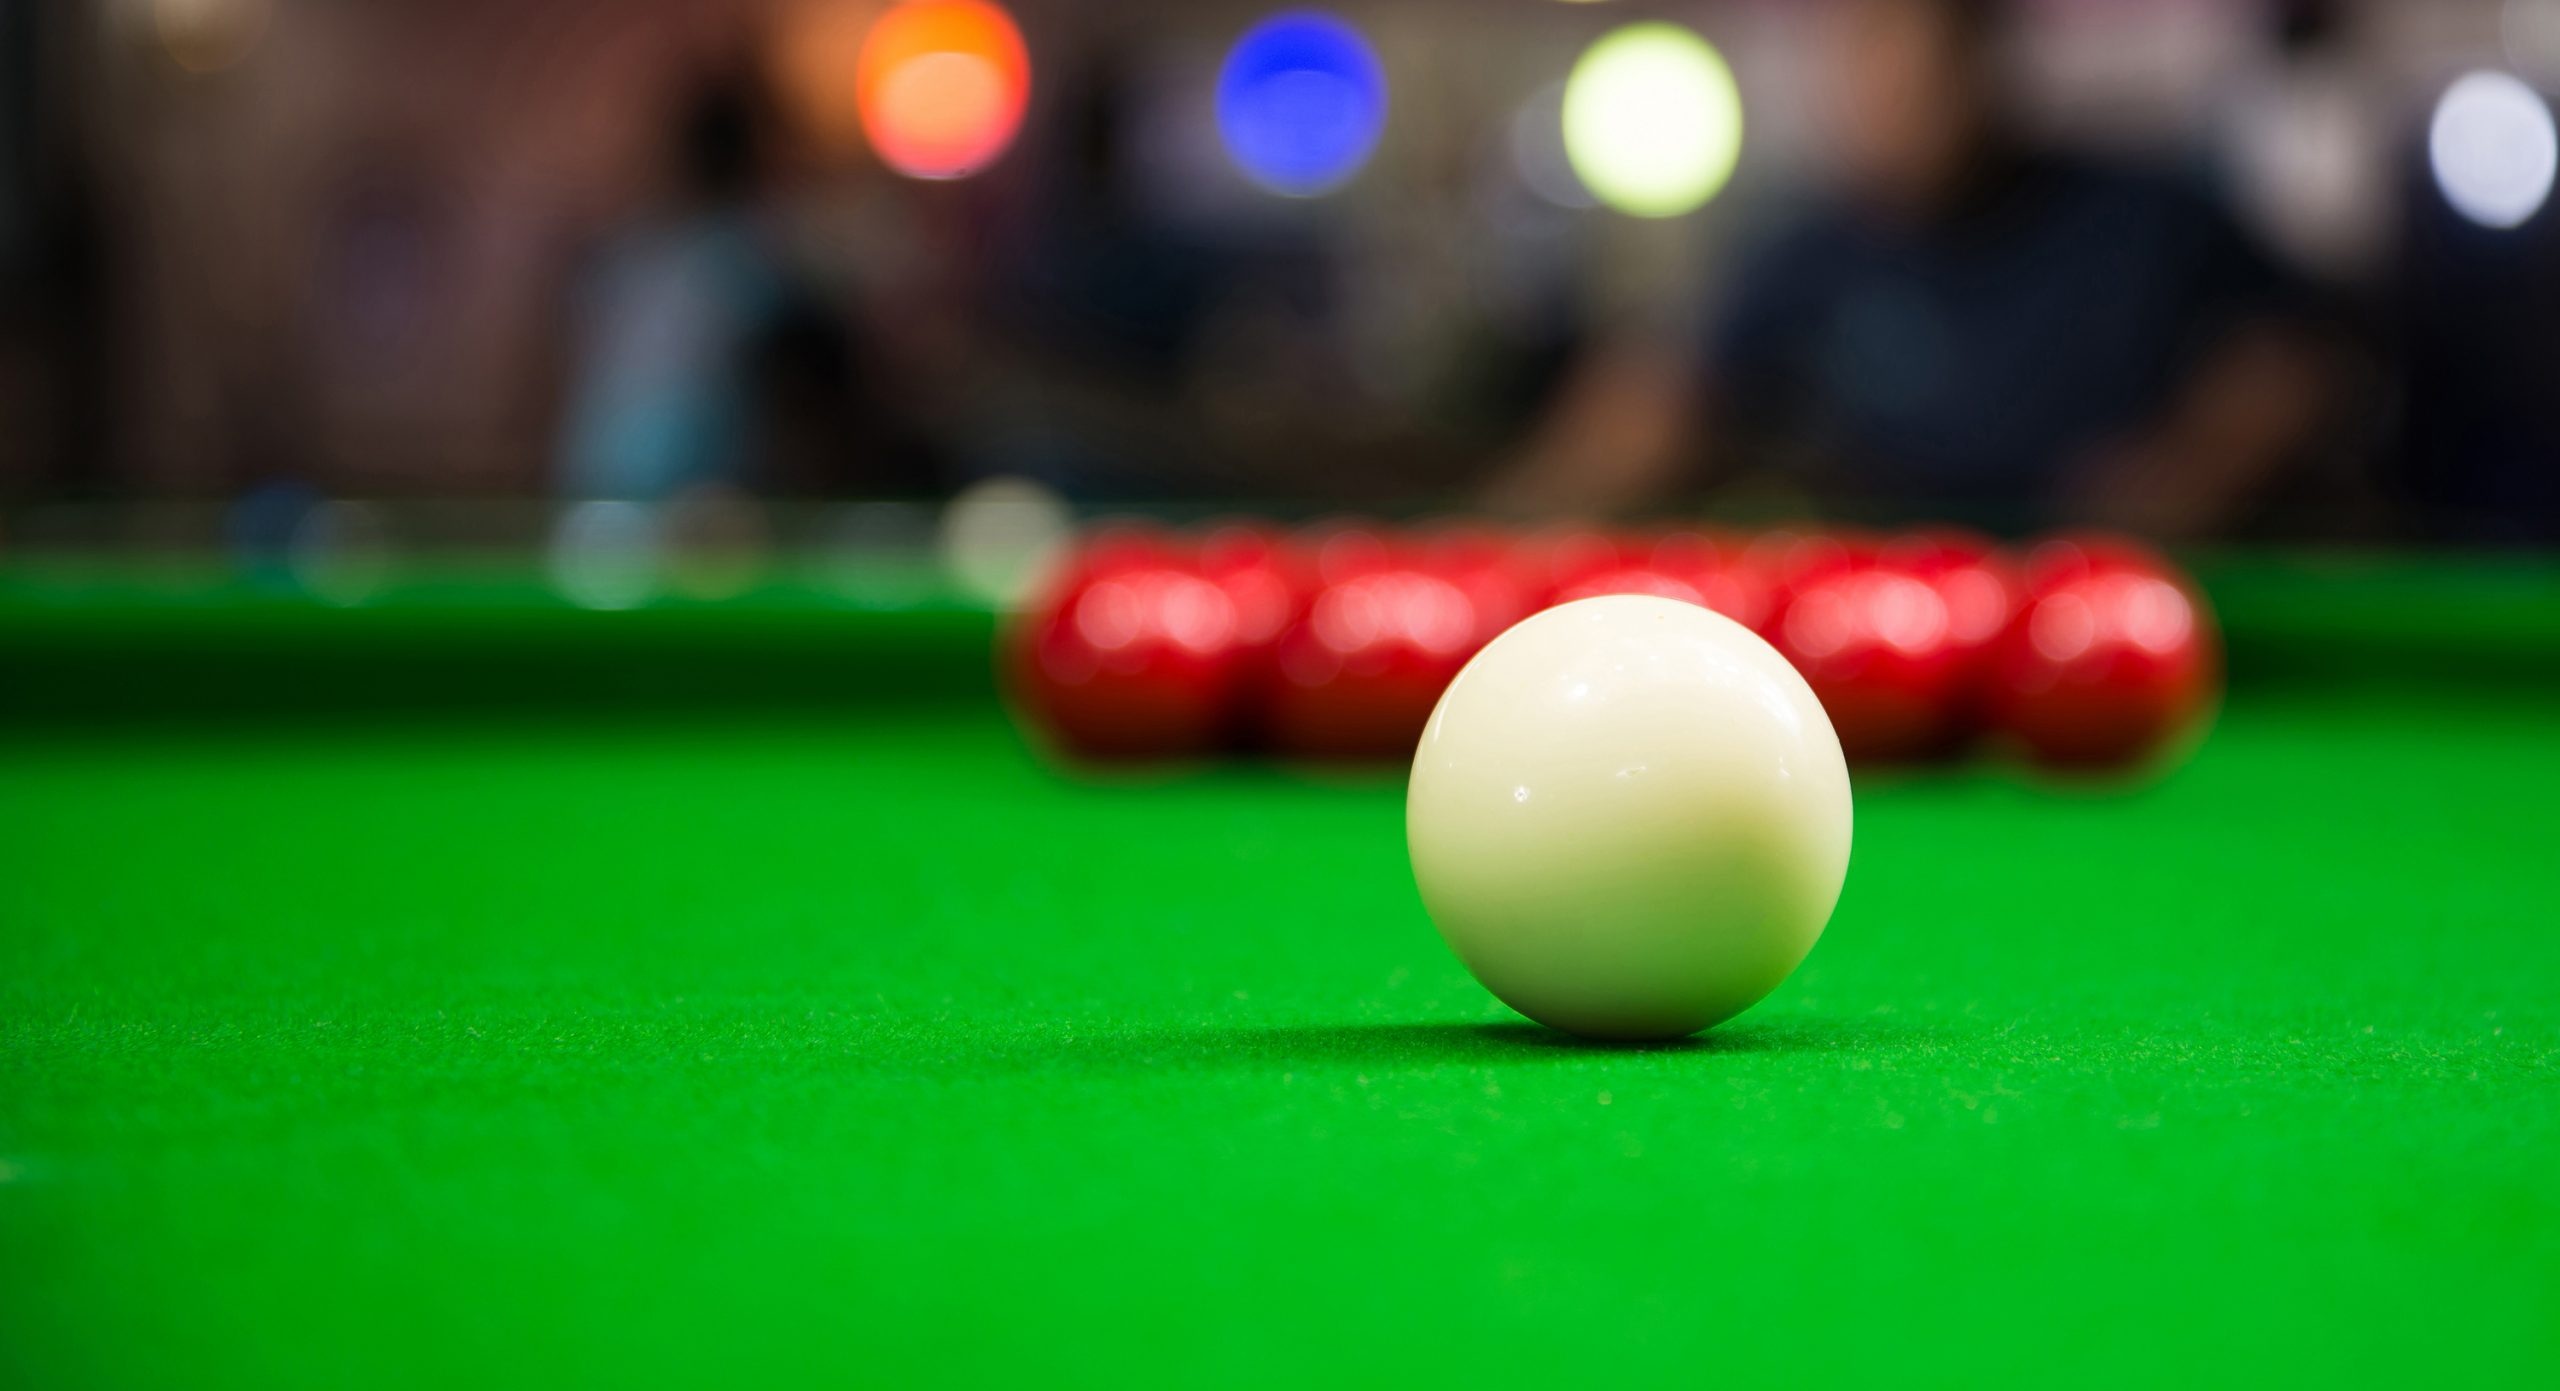 English snooker leagues support, New initiative, Strengthening grassroots, Boosting participation, 2560x1400 HD Desktop